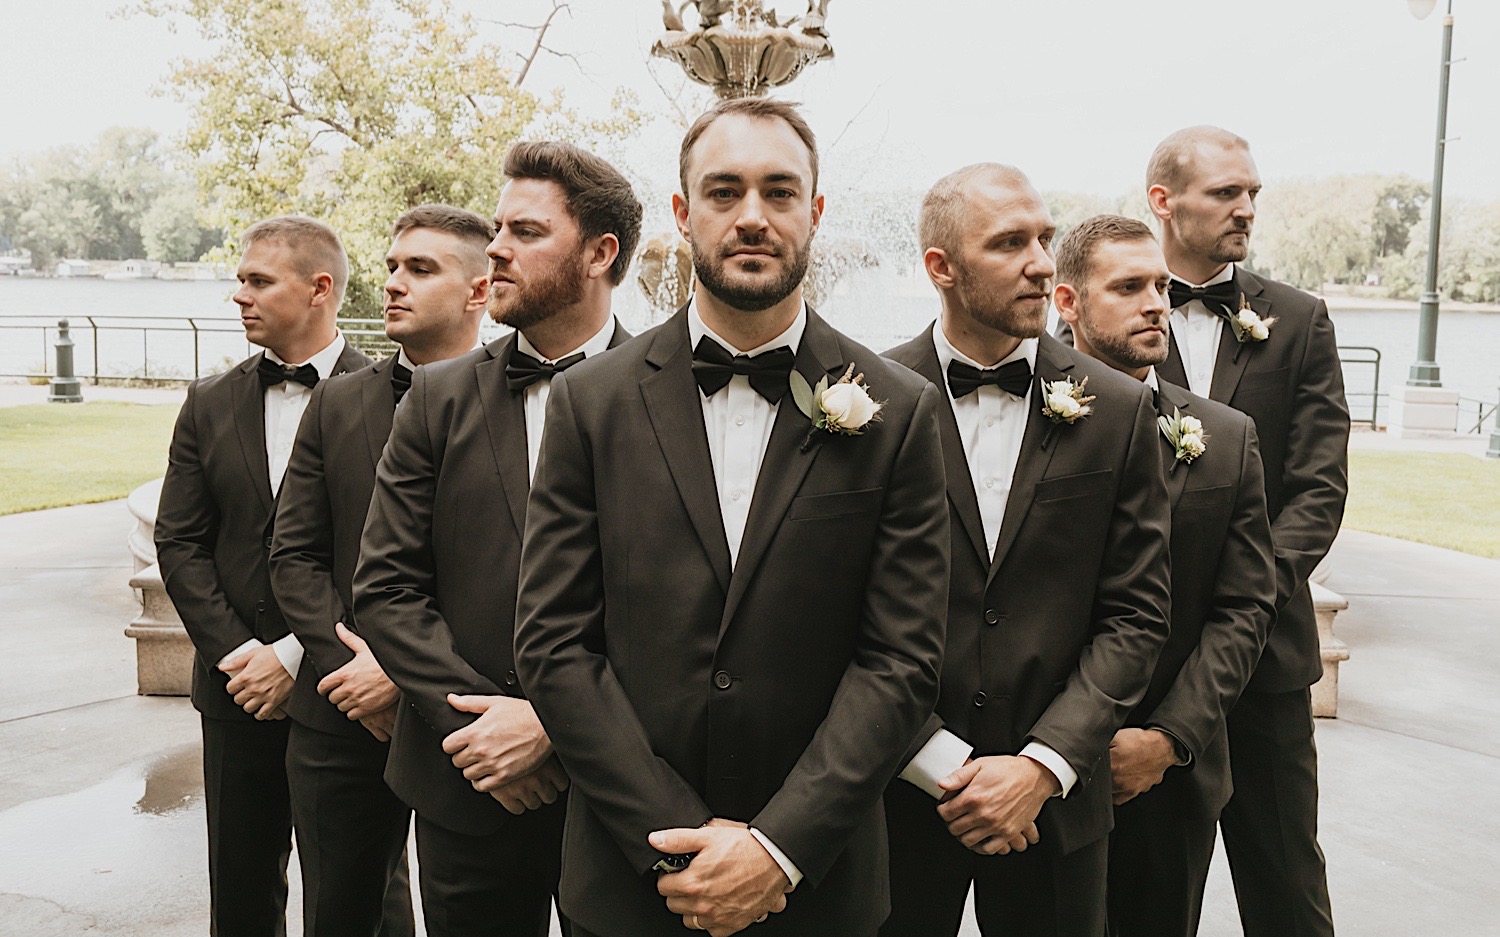 A groom looks at the camera with a serious face, on either side of him are his groomsmen looking off in the distance